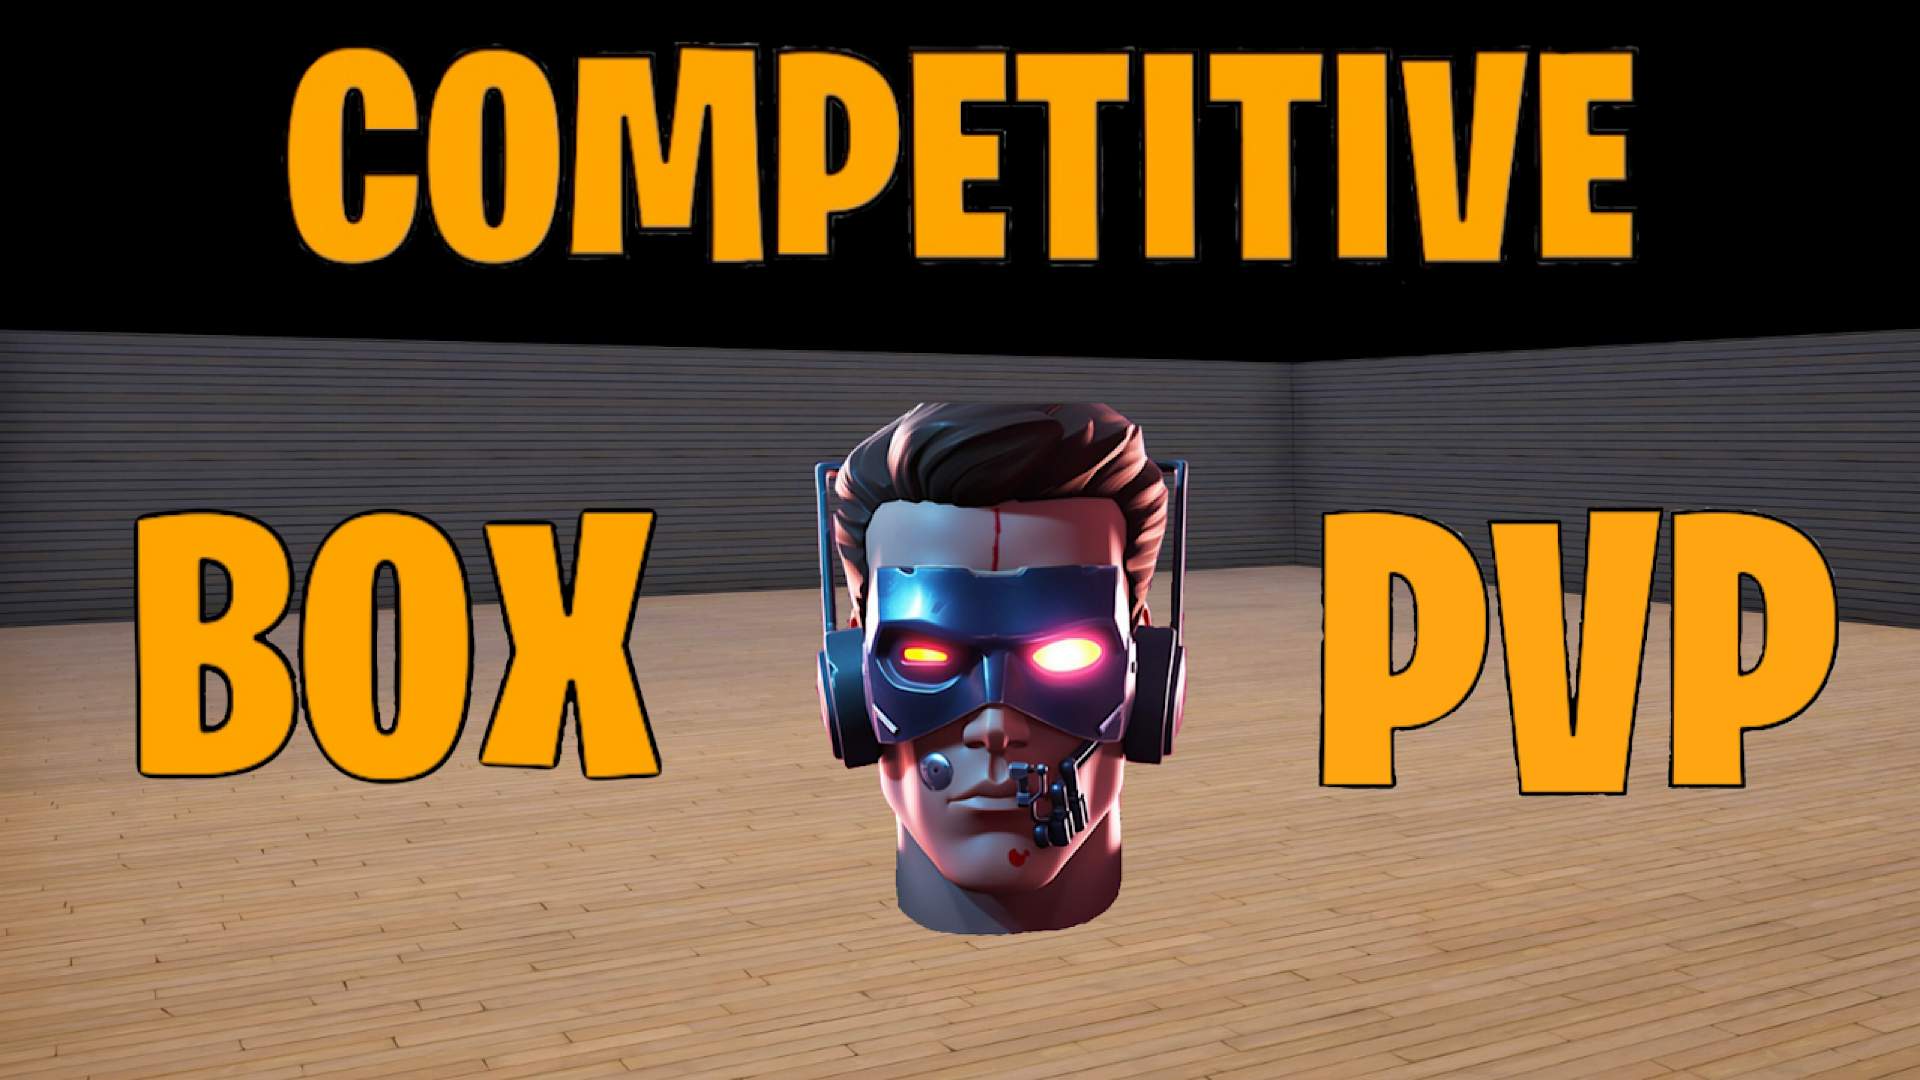 COMPETITIVE BOX PVP image 2